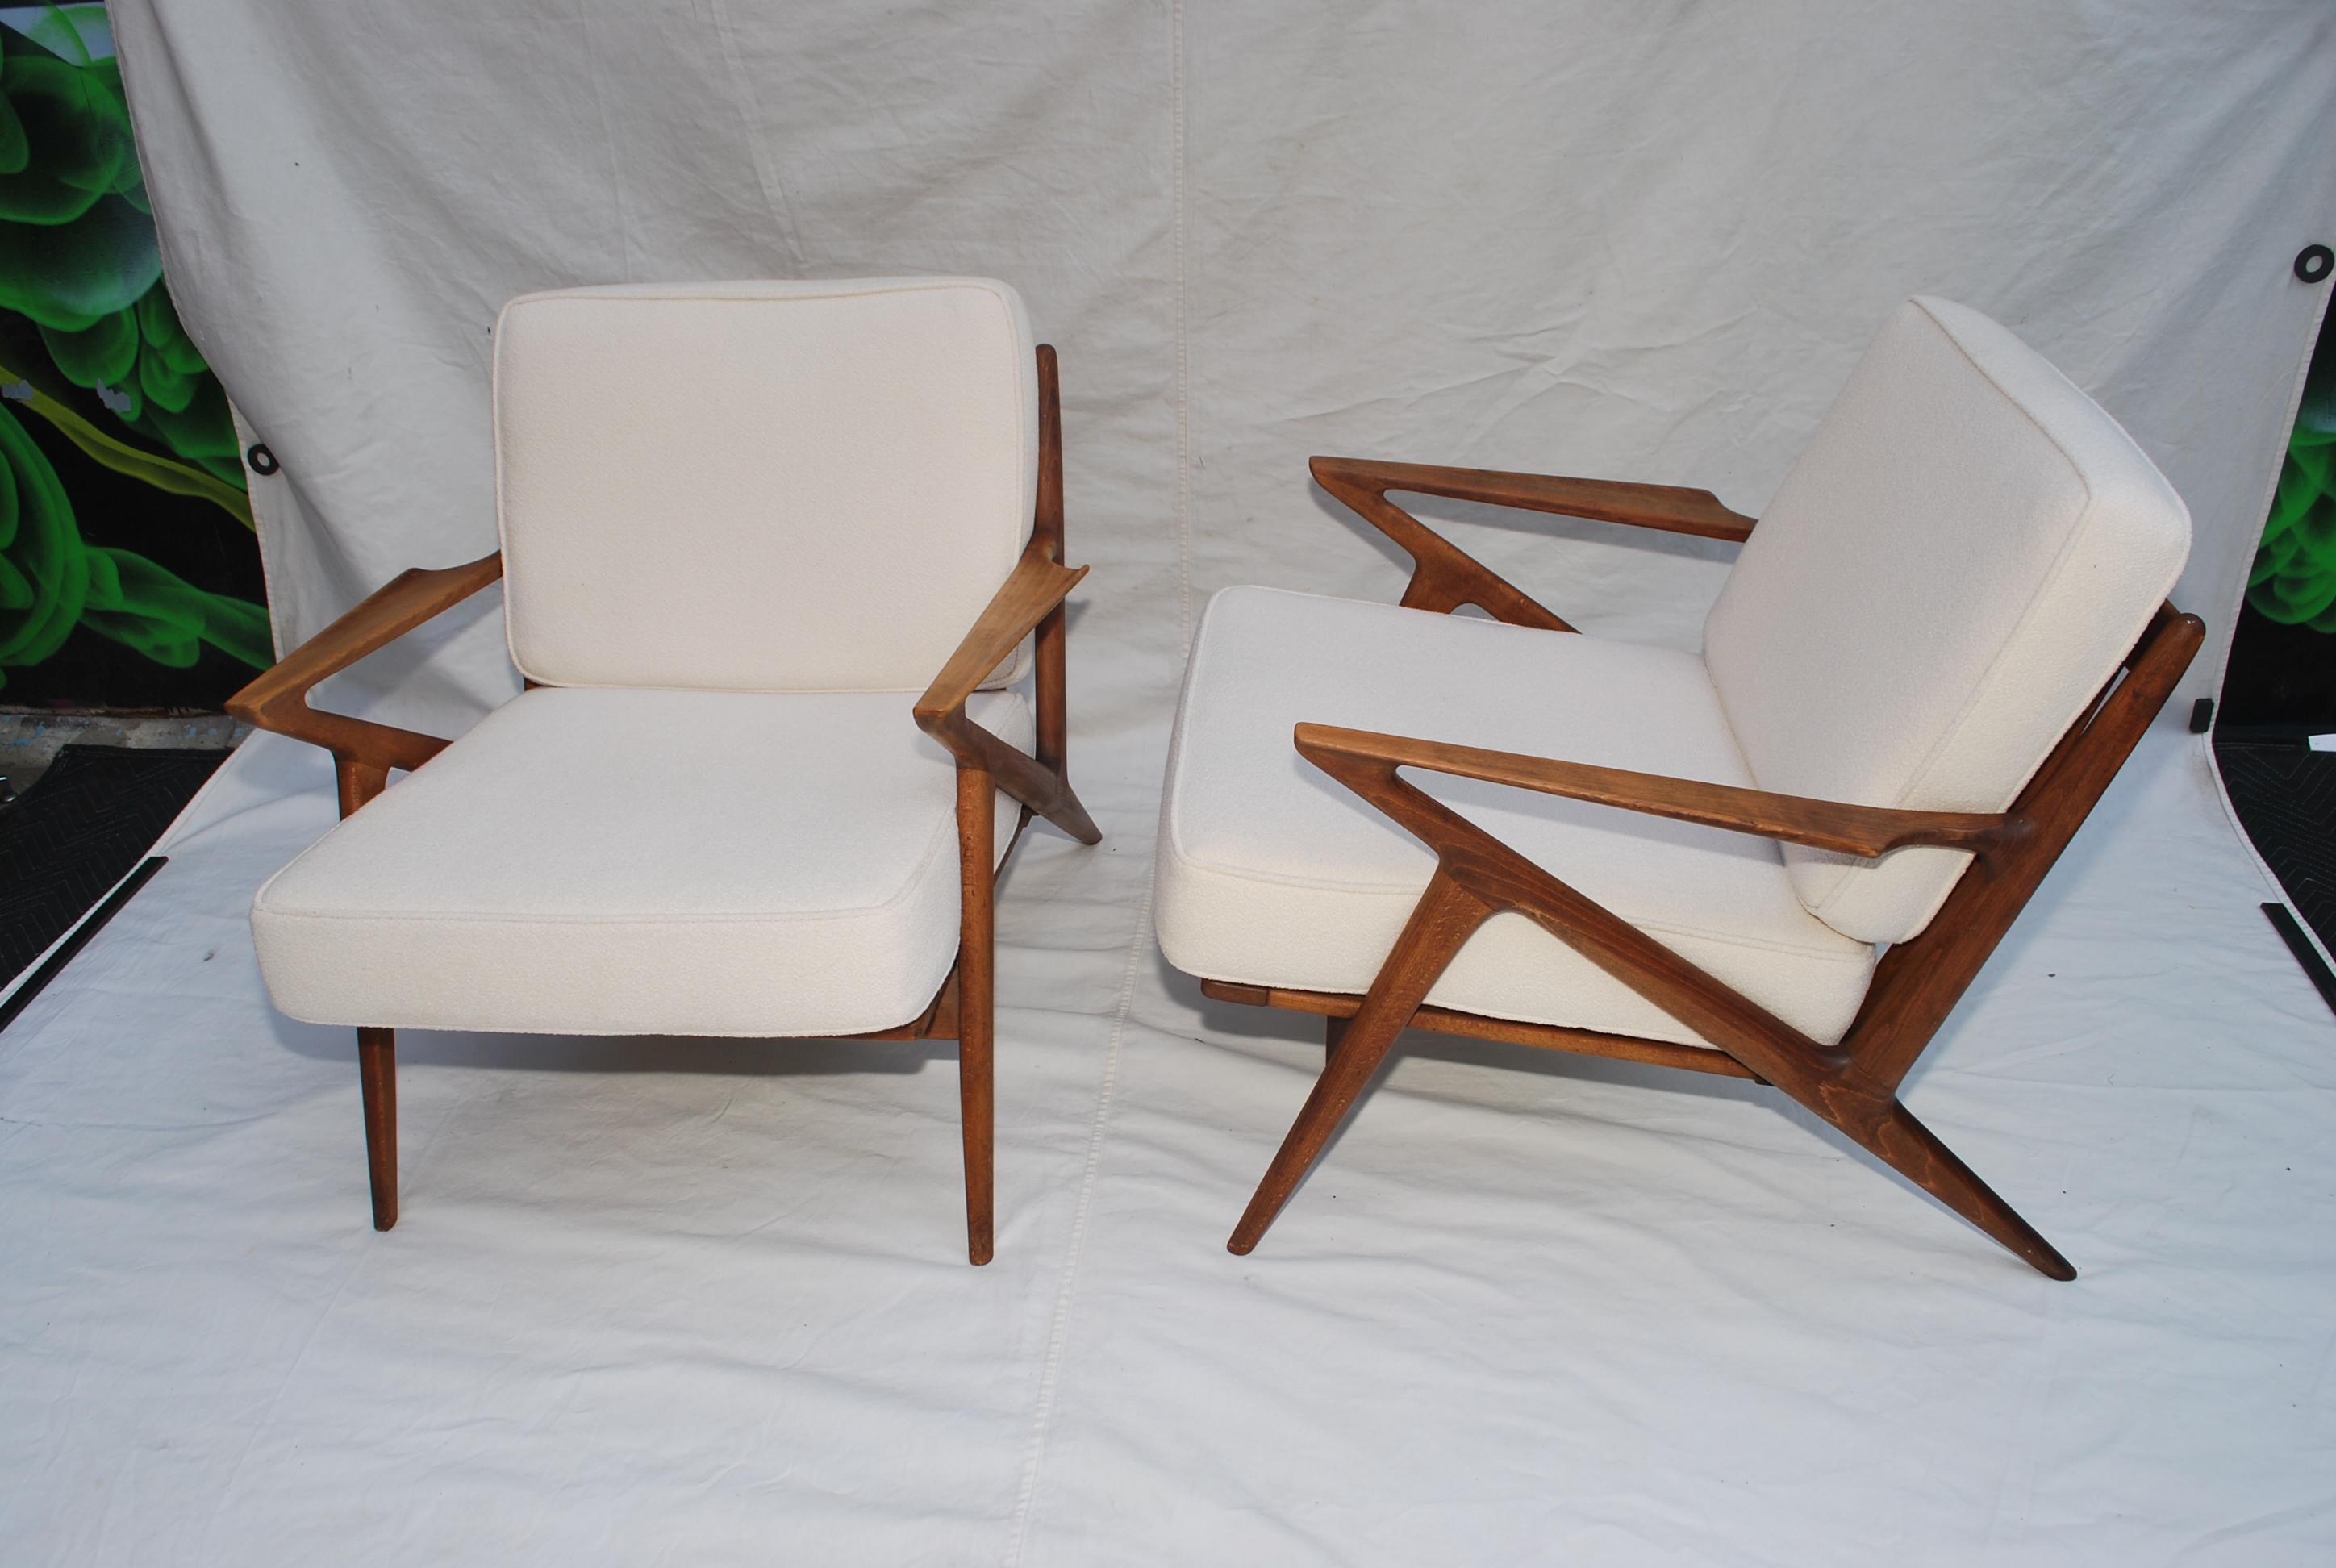 theses chair are very sexy and design by the iconic Danish designer Poul jensen, the chairs have been reupholstered and the patina of the wood is original, they are in great shape, I never say they are perfect, has everybody has a different standard.